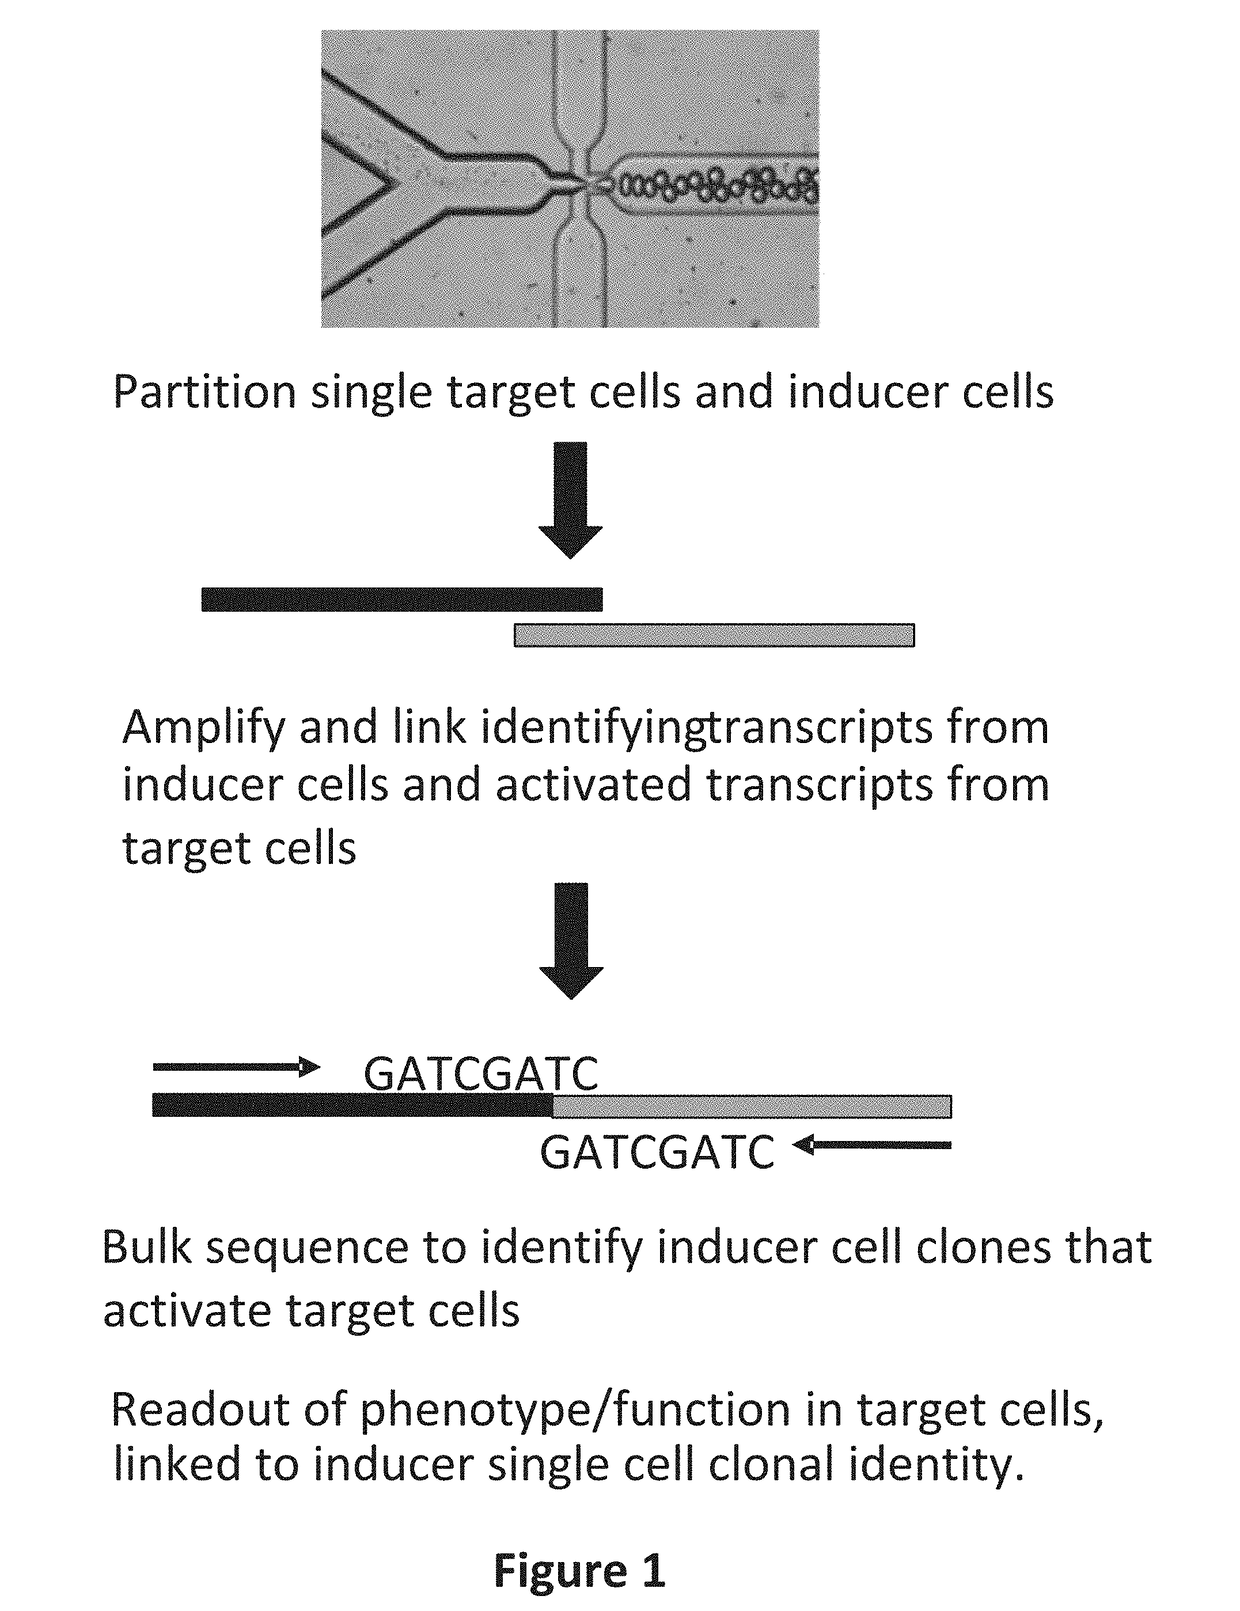 Systems and methods for massively parallel combinatorial analysis of single cells